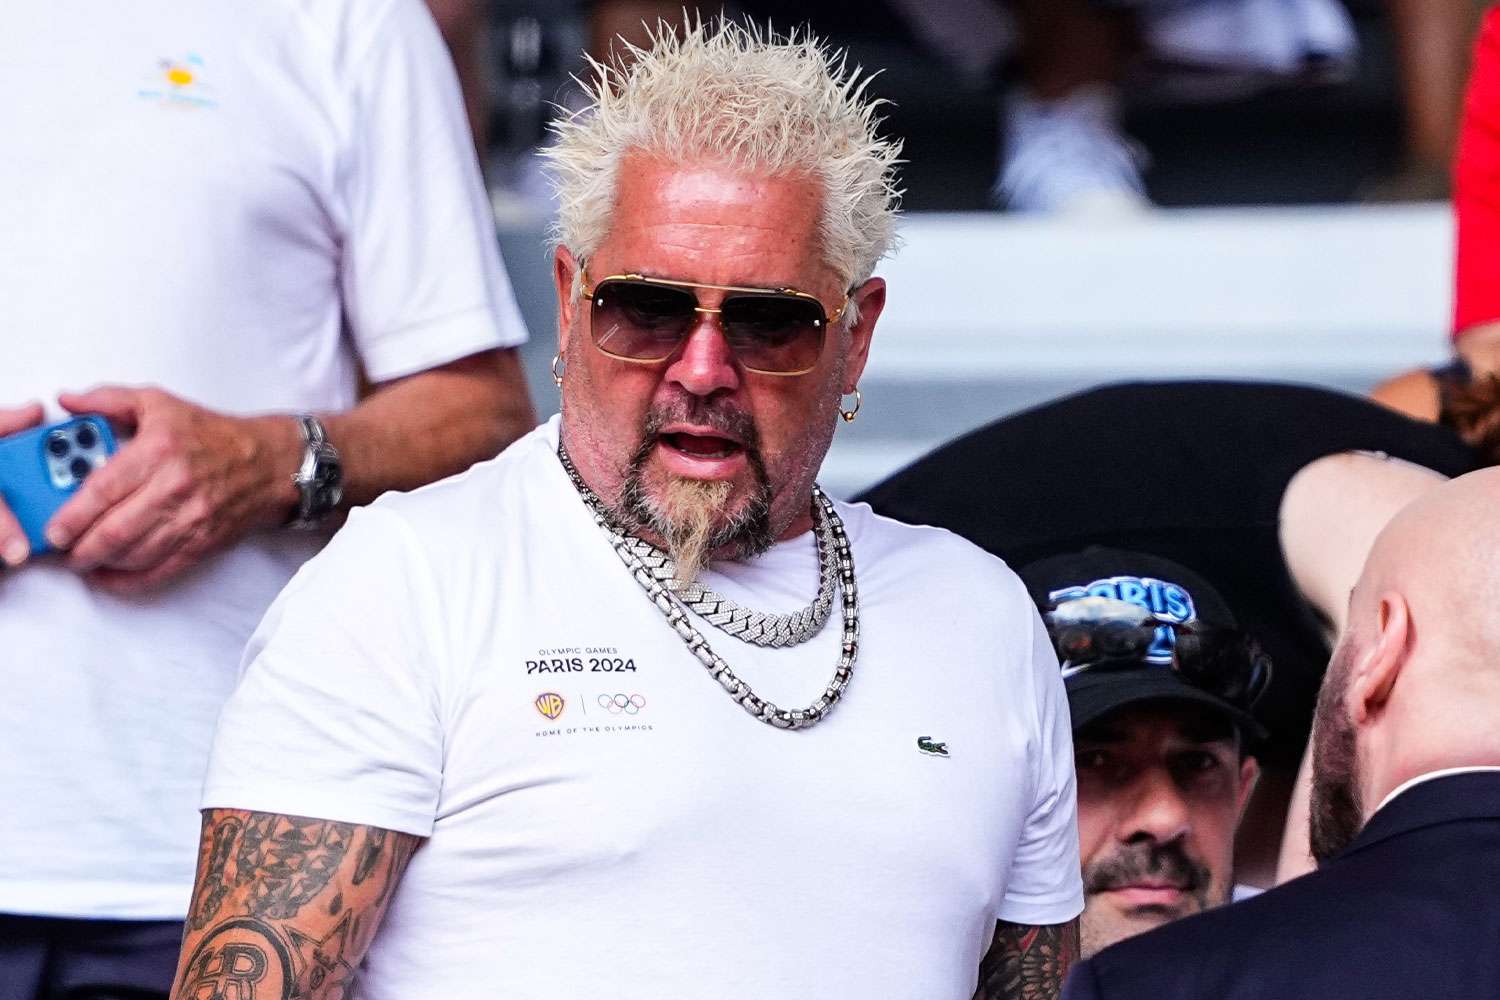 Guy Fieri Shares Star-Studded Photo with John Travolta, Bobby Flay and More at Paris Olympics: ‘What a Crew’